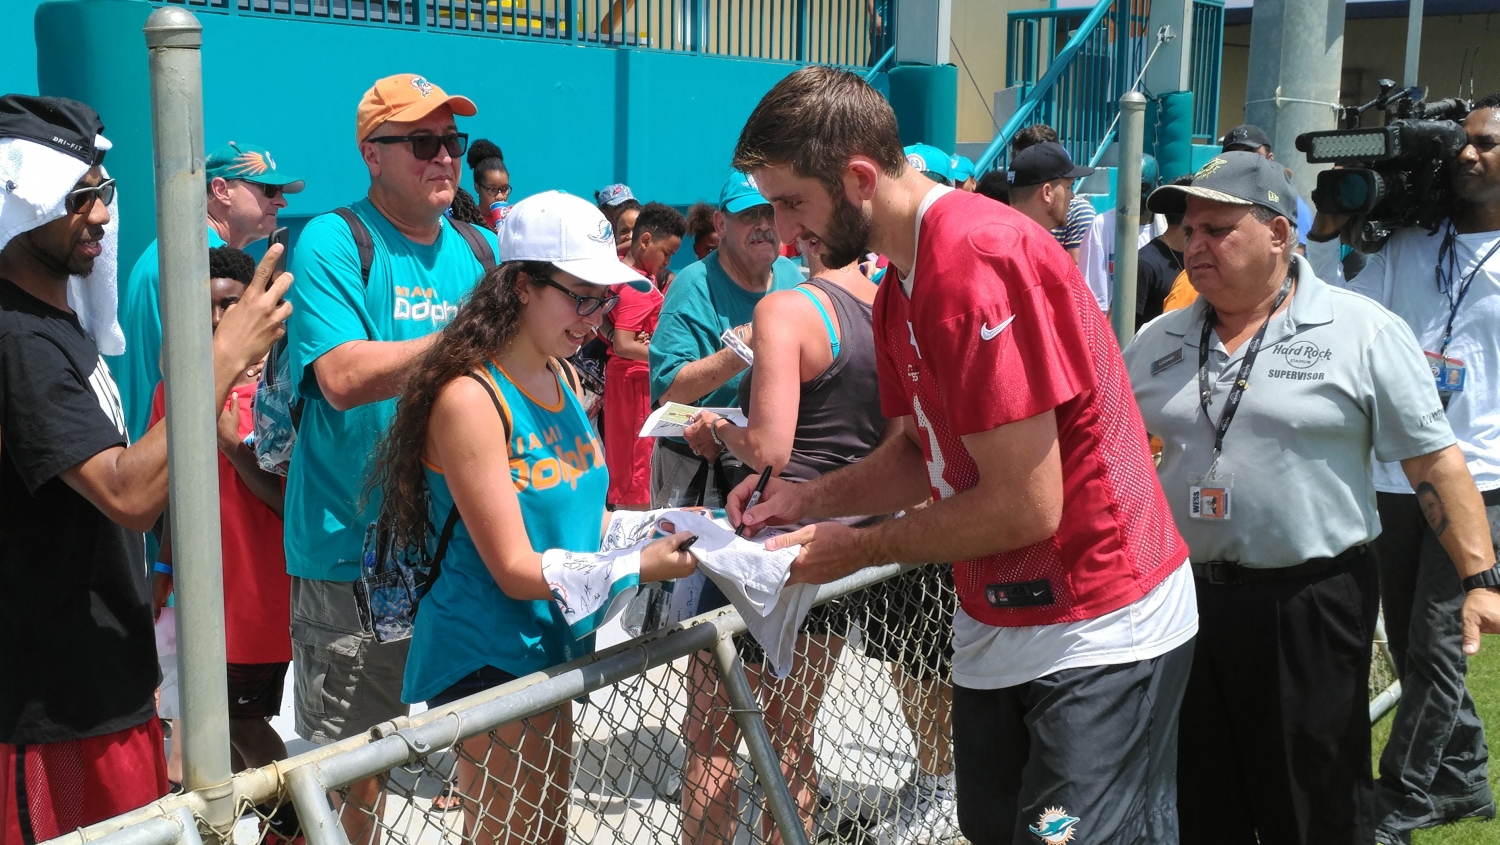 Josh Rosen signs autographs for fans following the first workout of Dolphins training camp on Thursday. (Craig Davis)